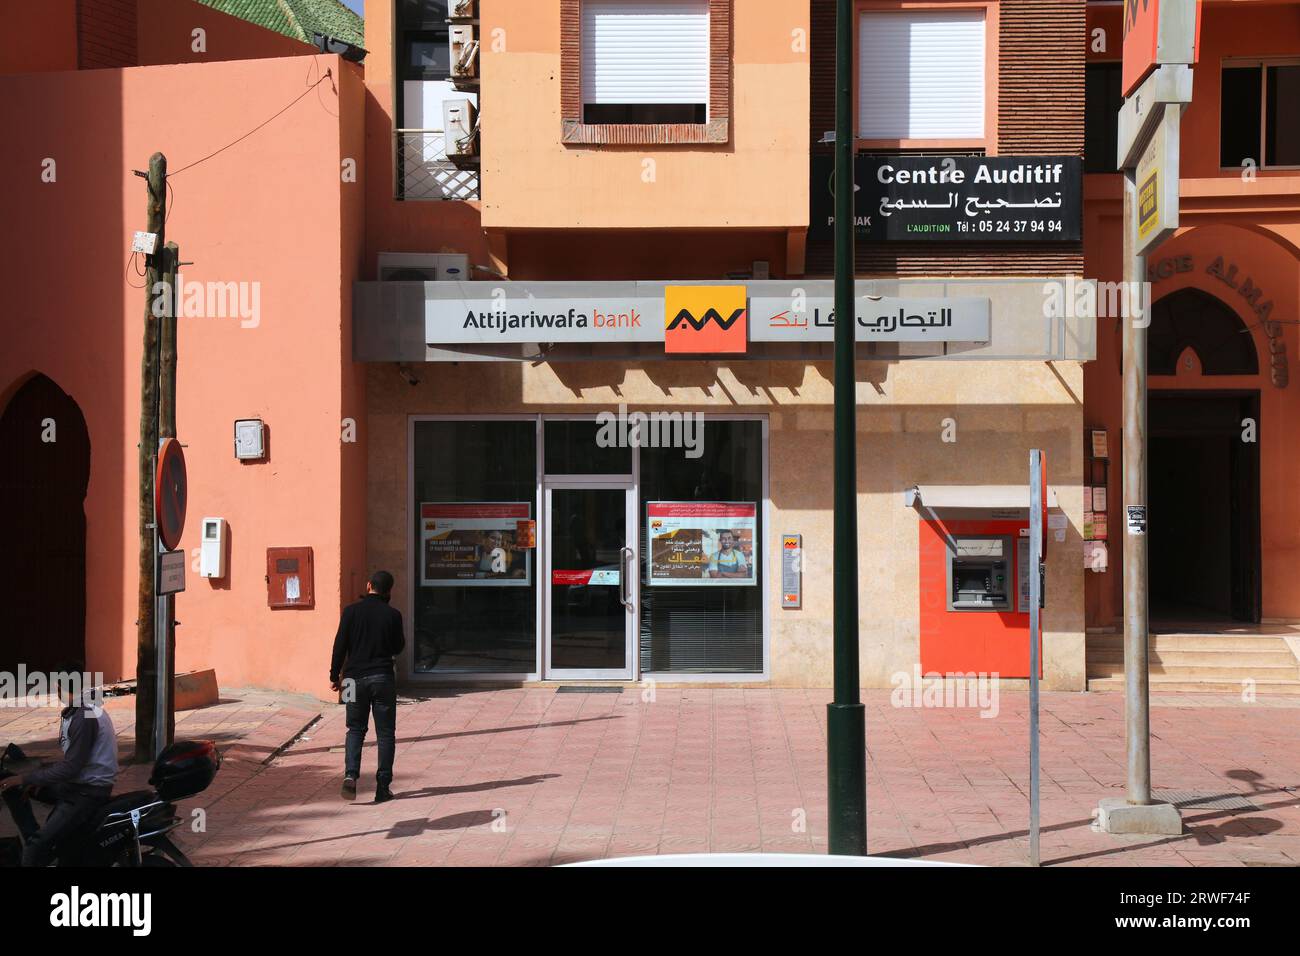 MARRAKECH, MOROCCO - FEBRUARY 21, 2022: People visit Attijariwafa Bank branch in Marrakech, Morocco. Attijariwafa Bank is a multinational Moroccan ban Stock Photo